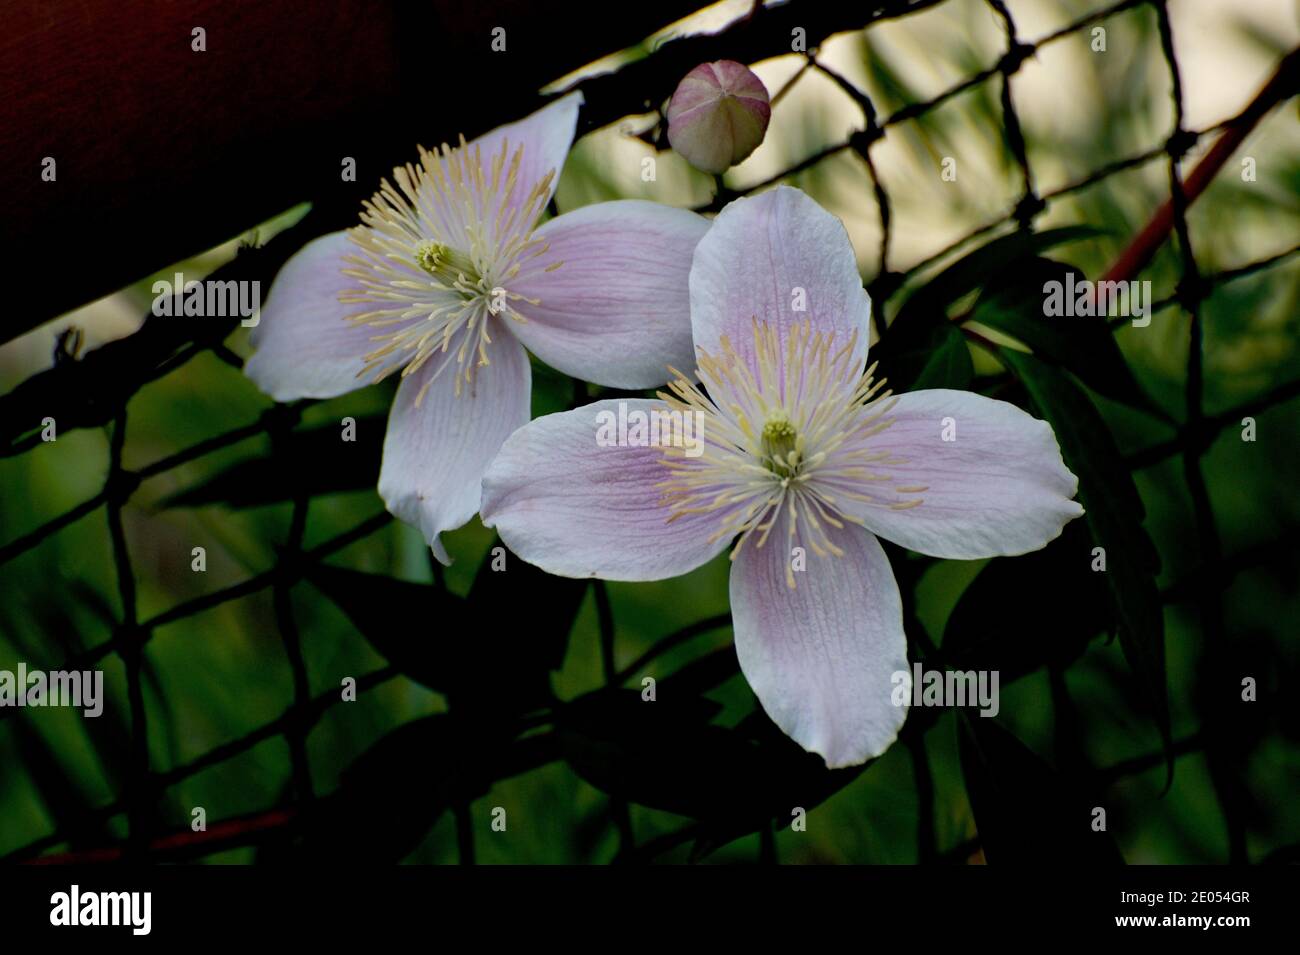 Australia does have its own species of Clematis - called Clematis Aristata. Not as showy as the European cultivated varieties, but does grow wild. Stock Photo